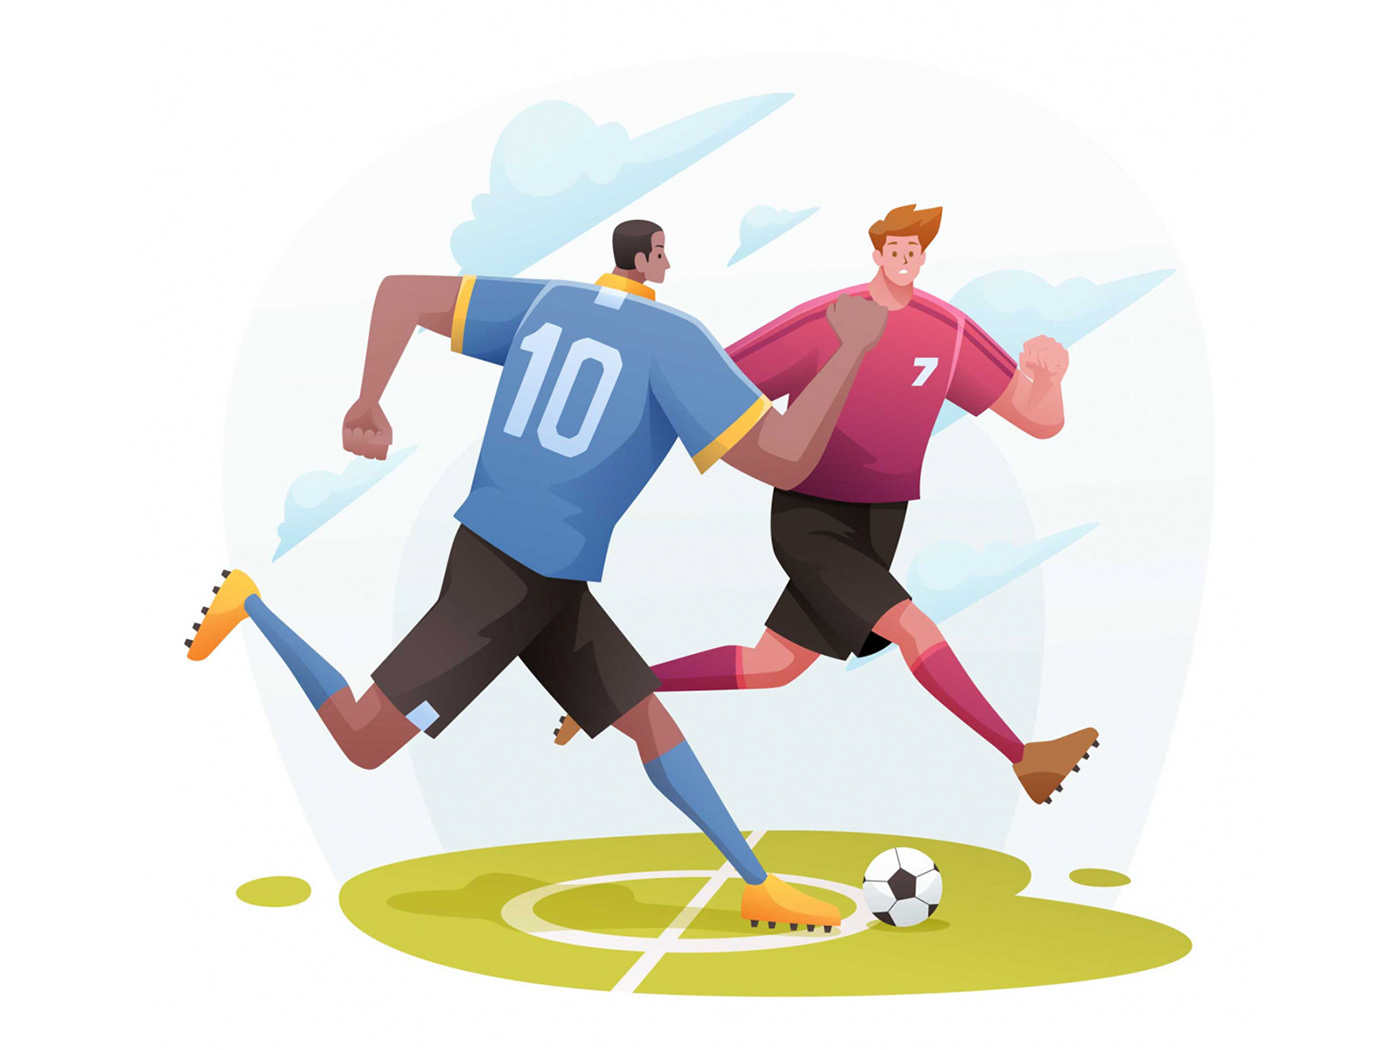 world cup freebie free vector free illustration ILLUSTRATION  free download Vector Illustration